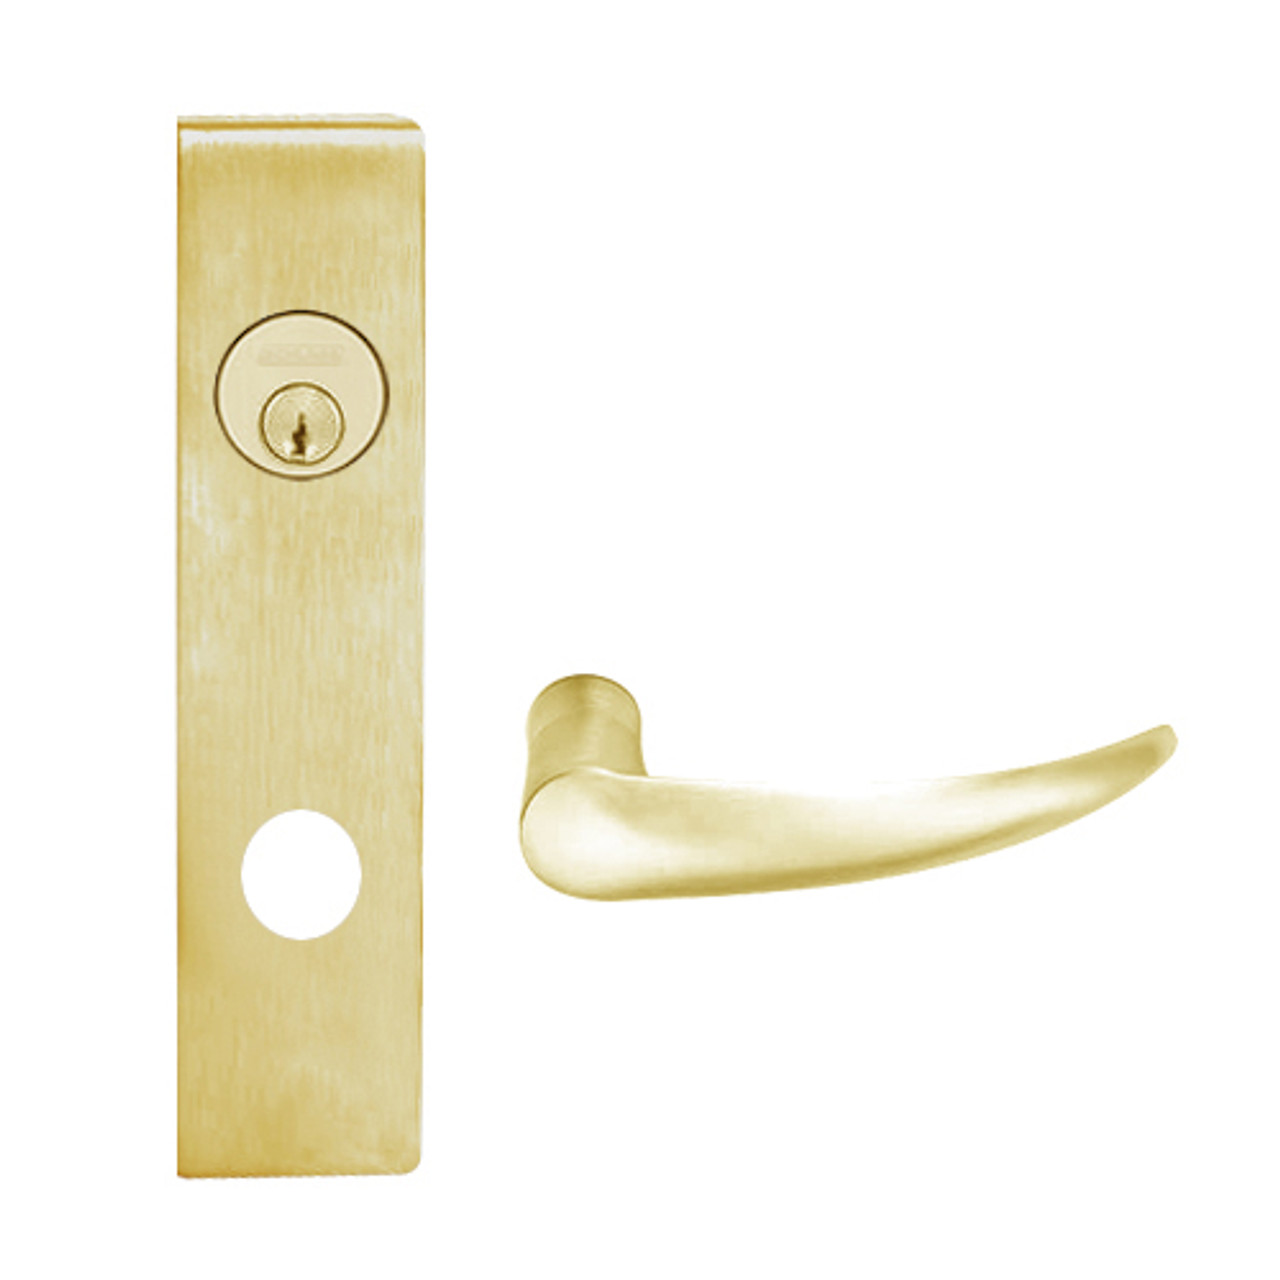 L9026P-OME-L-606 Schlage L Series Exit Lock with Cylinder Commercial Mortise Lock with Omega Lever Design in Satin Brass